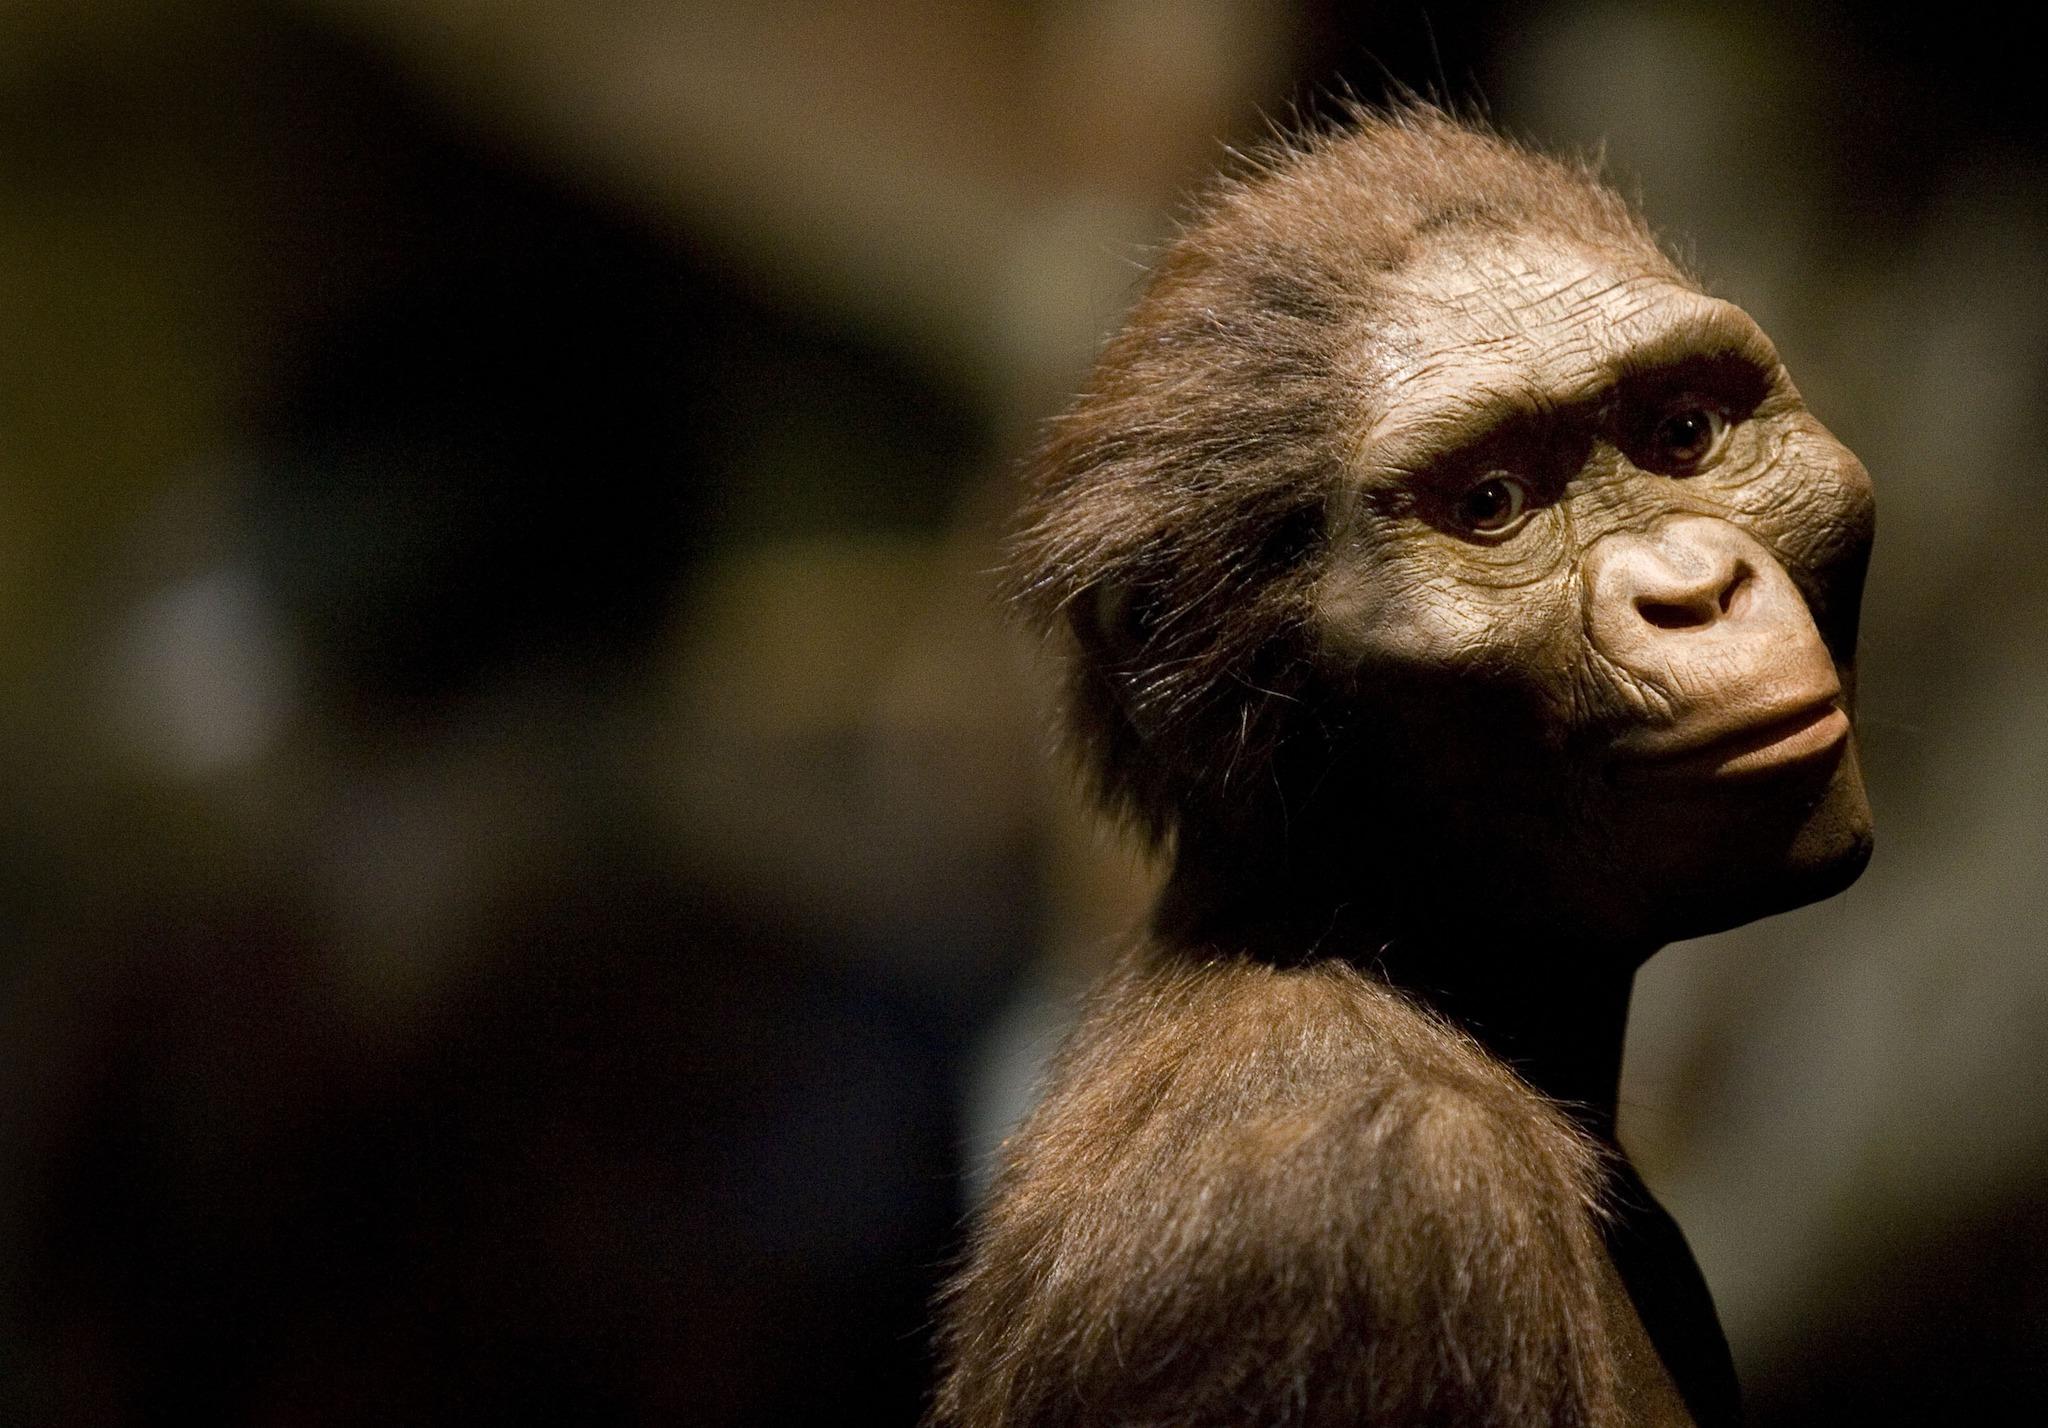 A sculptor's rendering of the hominid Australopithecus afarensis